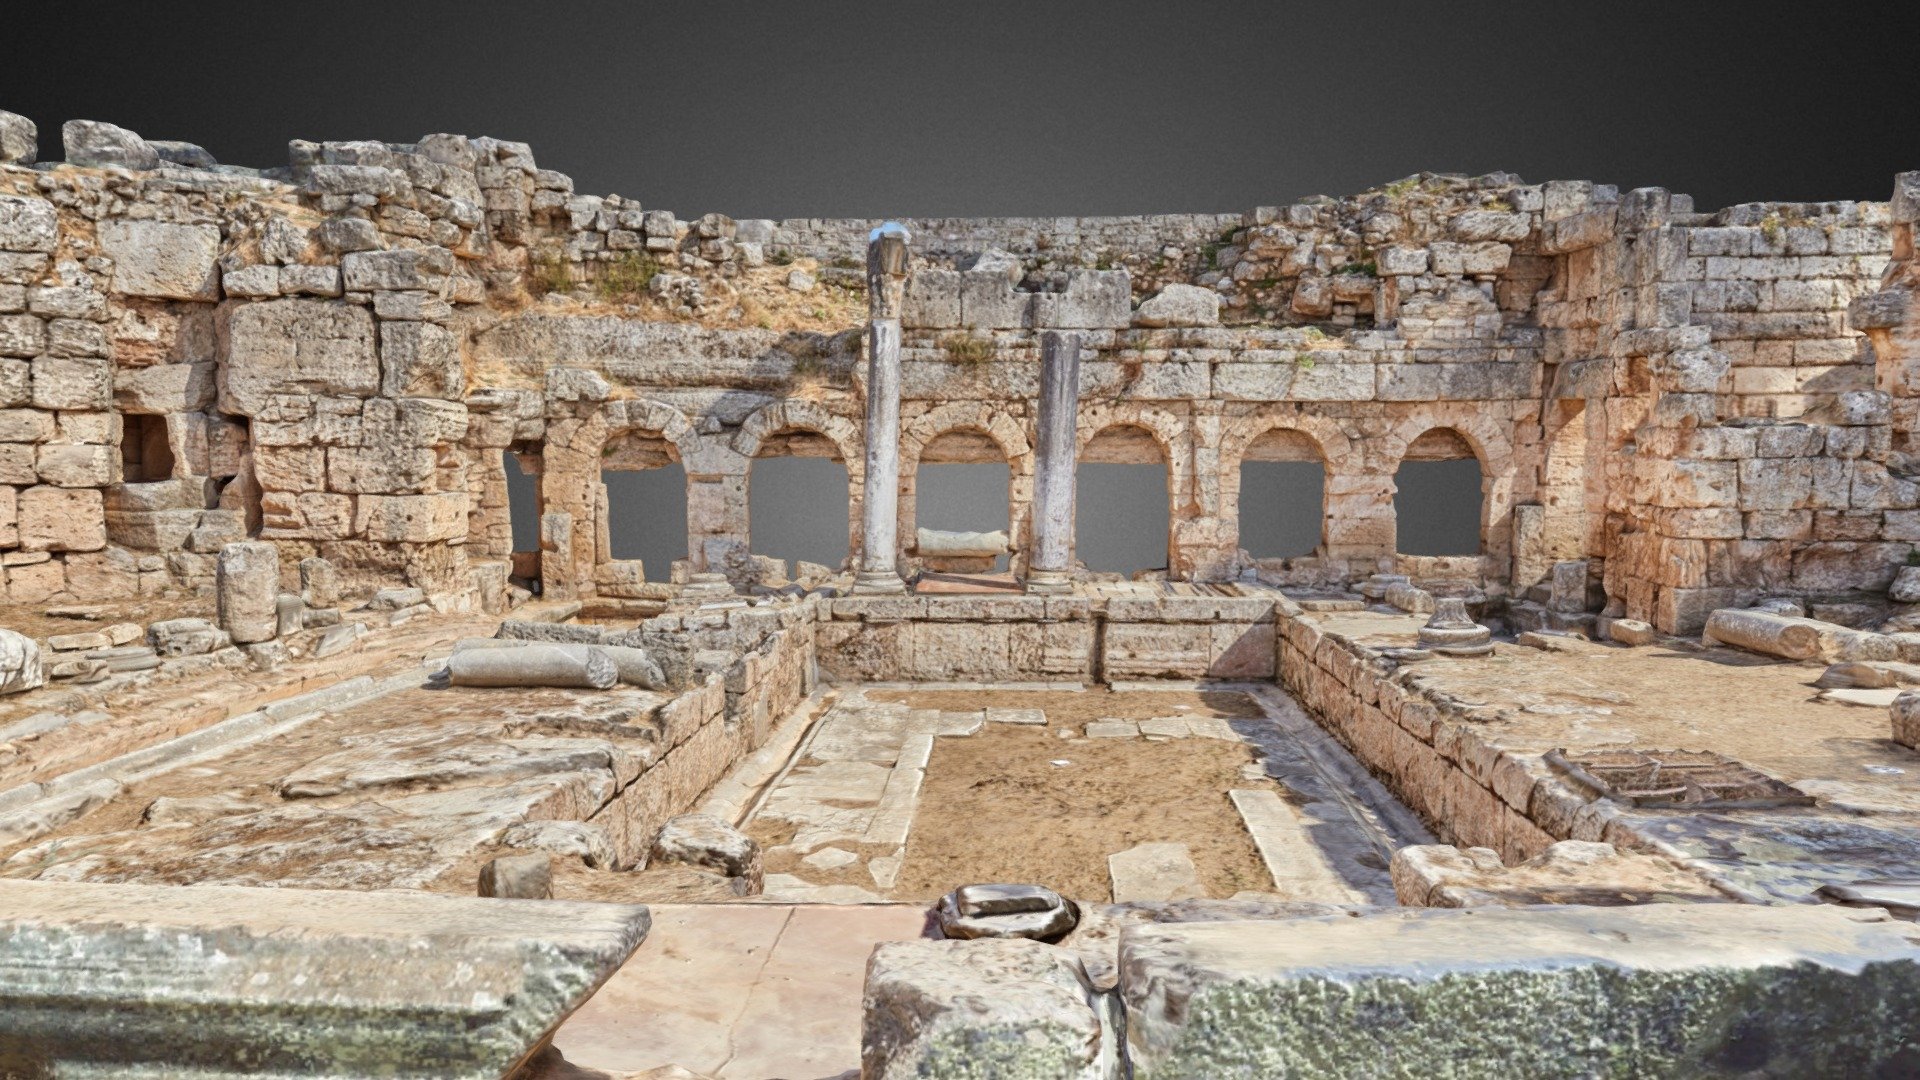 For centuries, the Fountain of Peirene was a crucial source of fresh water for the city of Corinth. The Greeks and Romans considered it a sacred location where the great Pegasus was tamed by a local hero. The 3rd century facade that is still visible at the site today showcases the best of Roman architecture and engineering.

LiDAR and photogrammetric data are available for this project at openheritage3D.org

https://openheritage3d.org/project.php?id=h3r7-t916 - Fountain of Peirene, Corinth - 3D model by CyArk 3d model